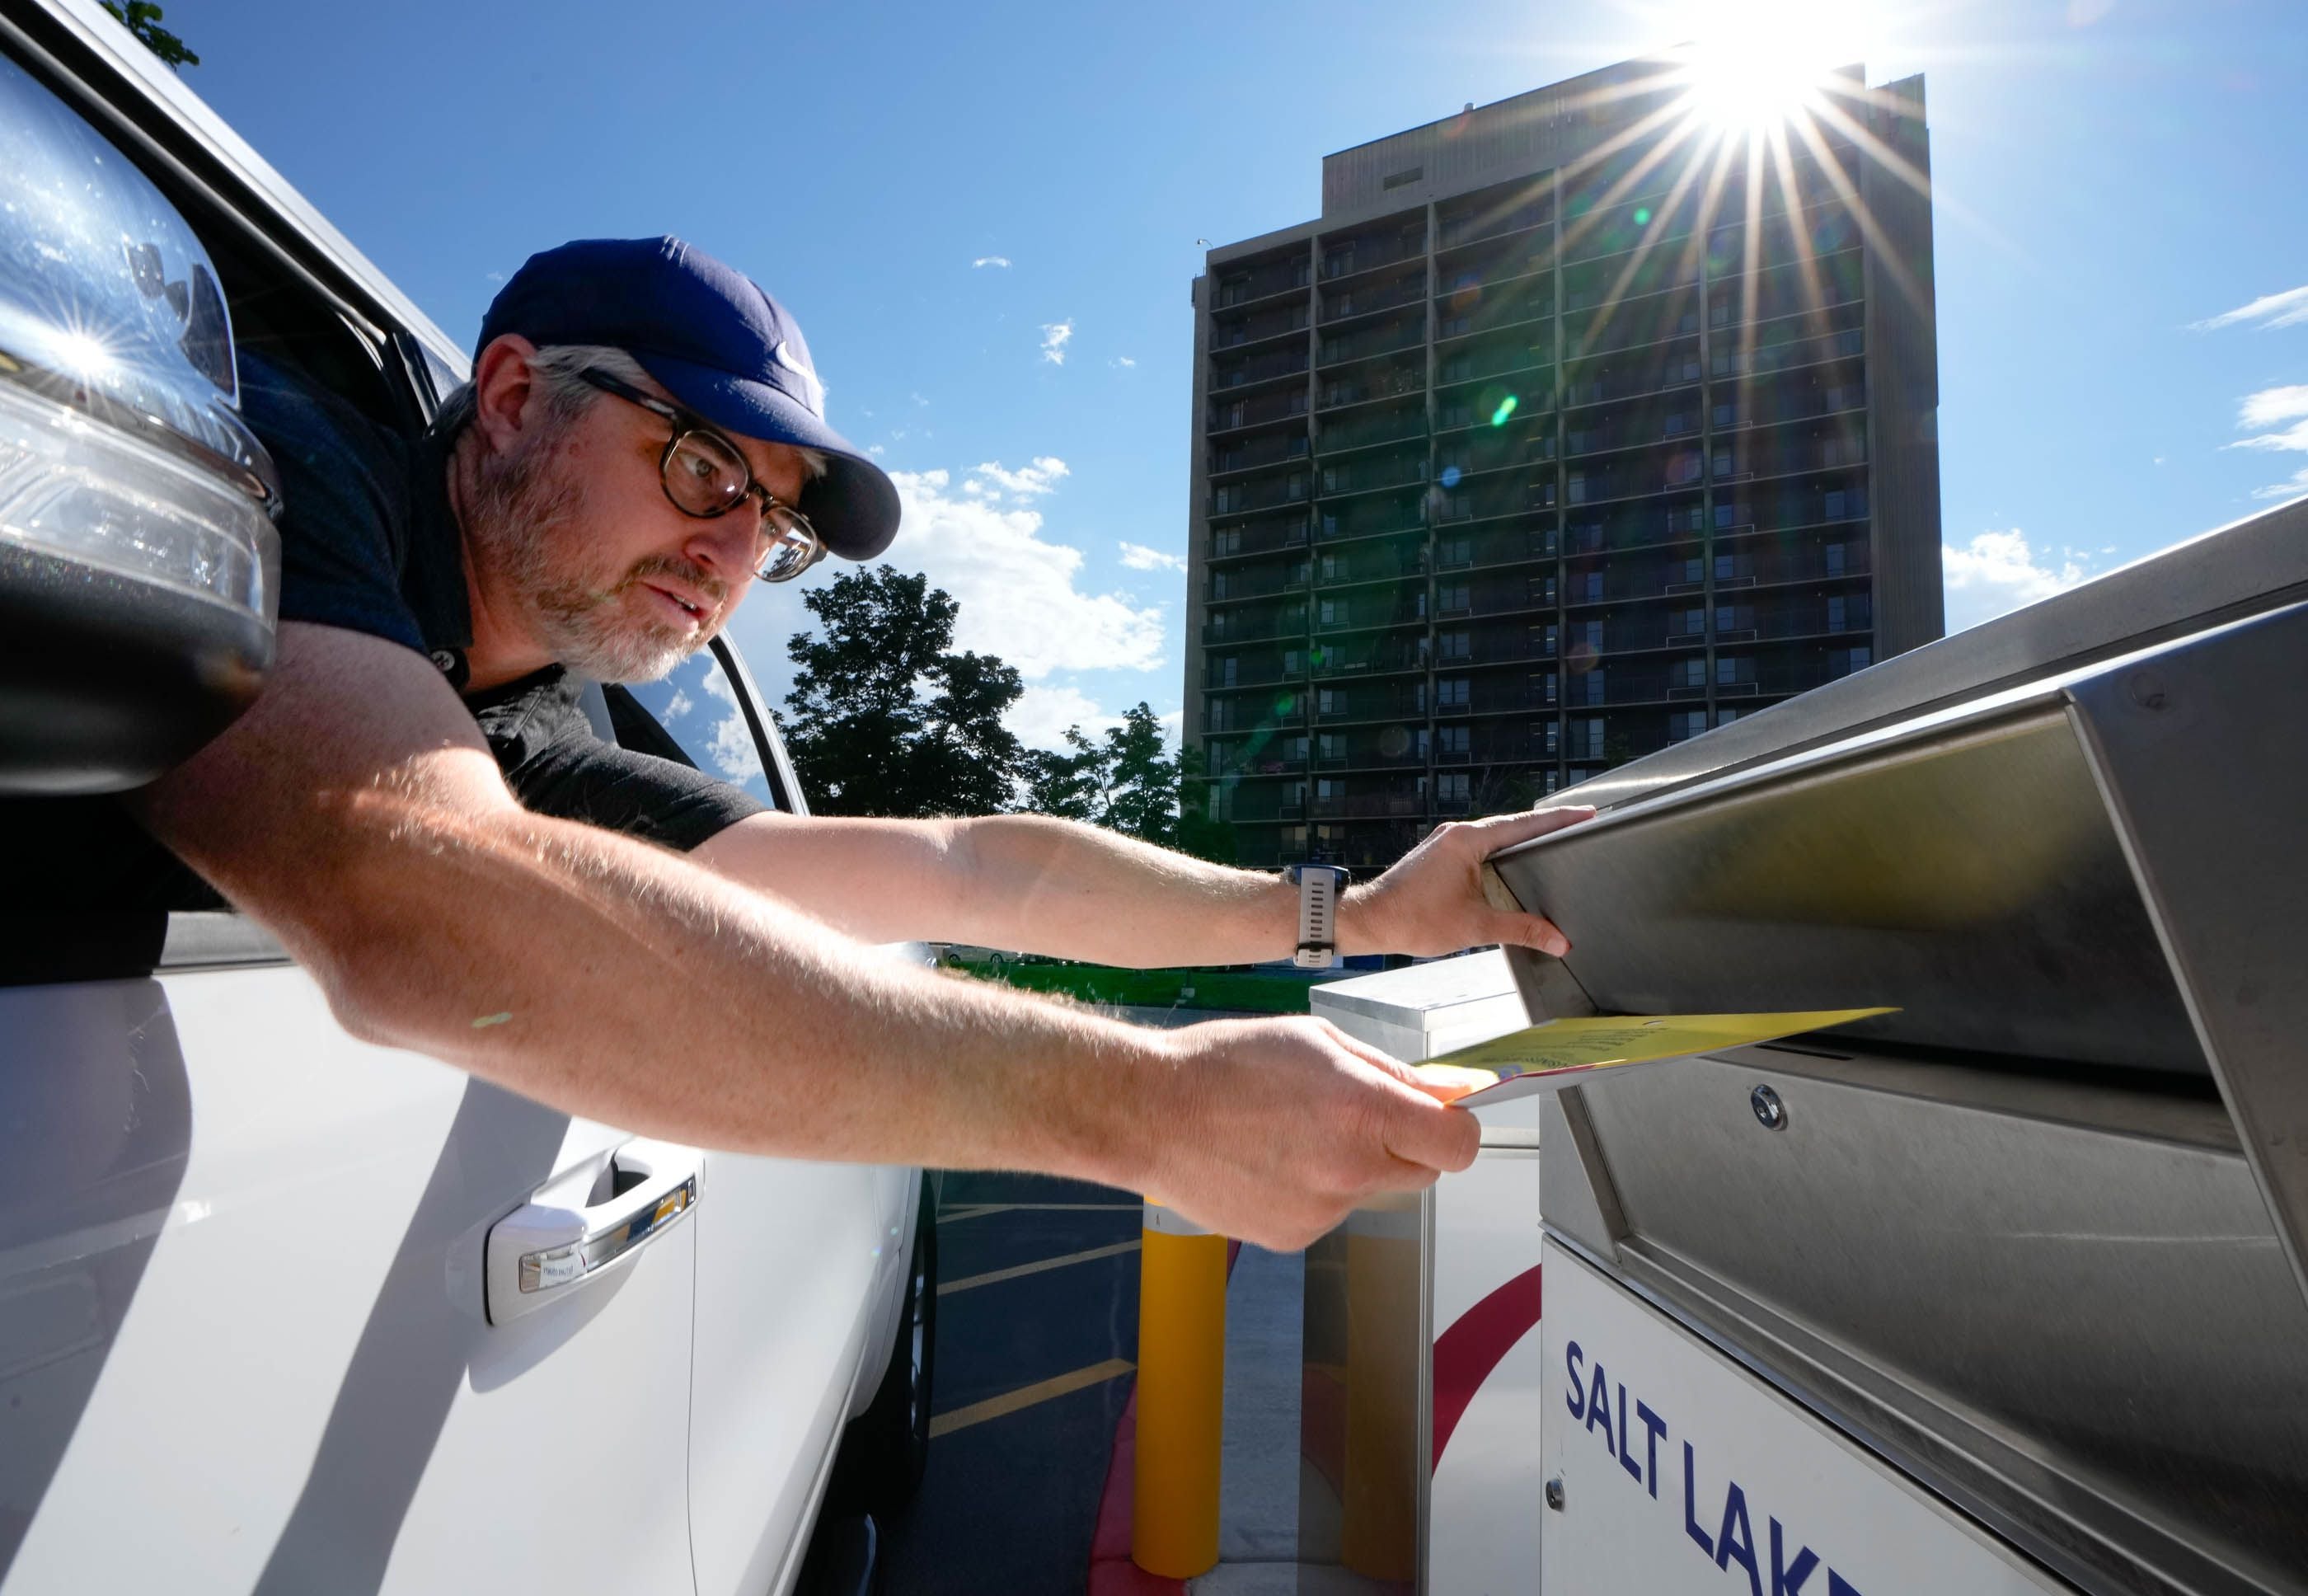 (Francisco Kjolseth | The Salt Lake Tribune) Corey Hankey drops his ballot into the ballot box at the Salt Lake County Government Center during primary Election Day on Tuesday, June 28, 2022.